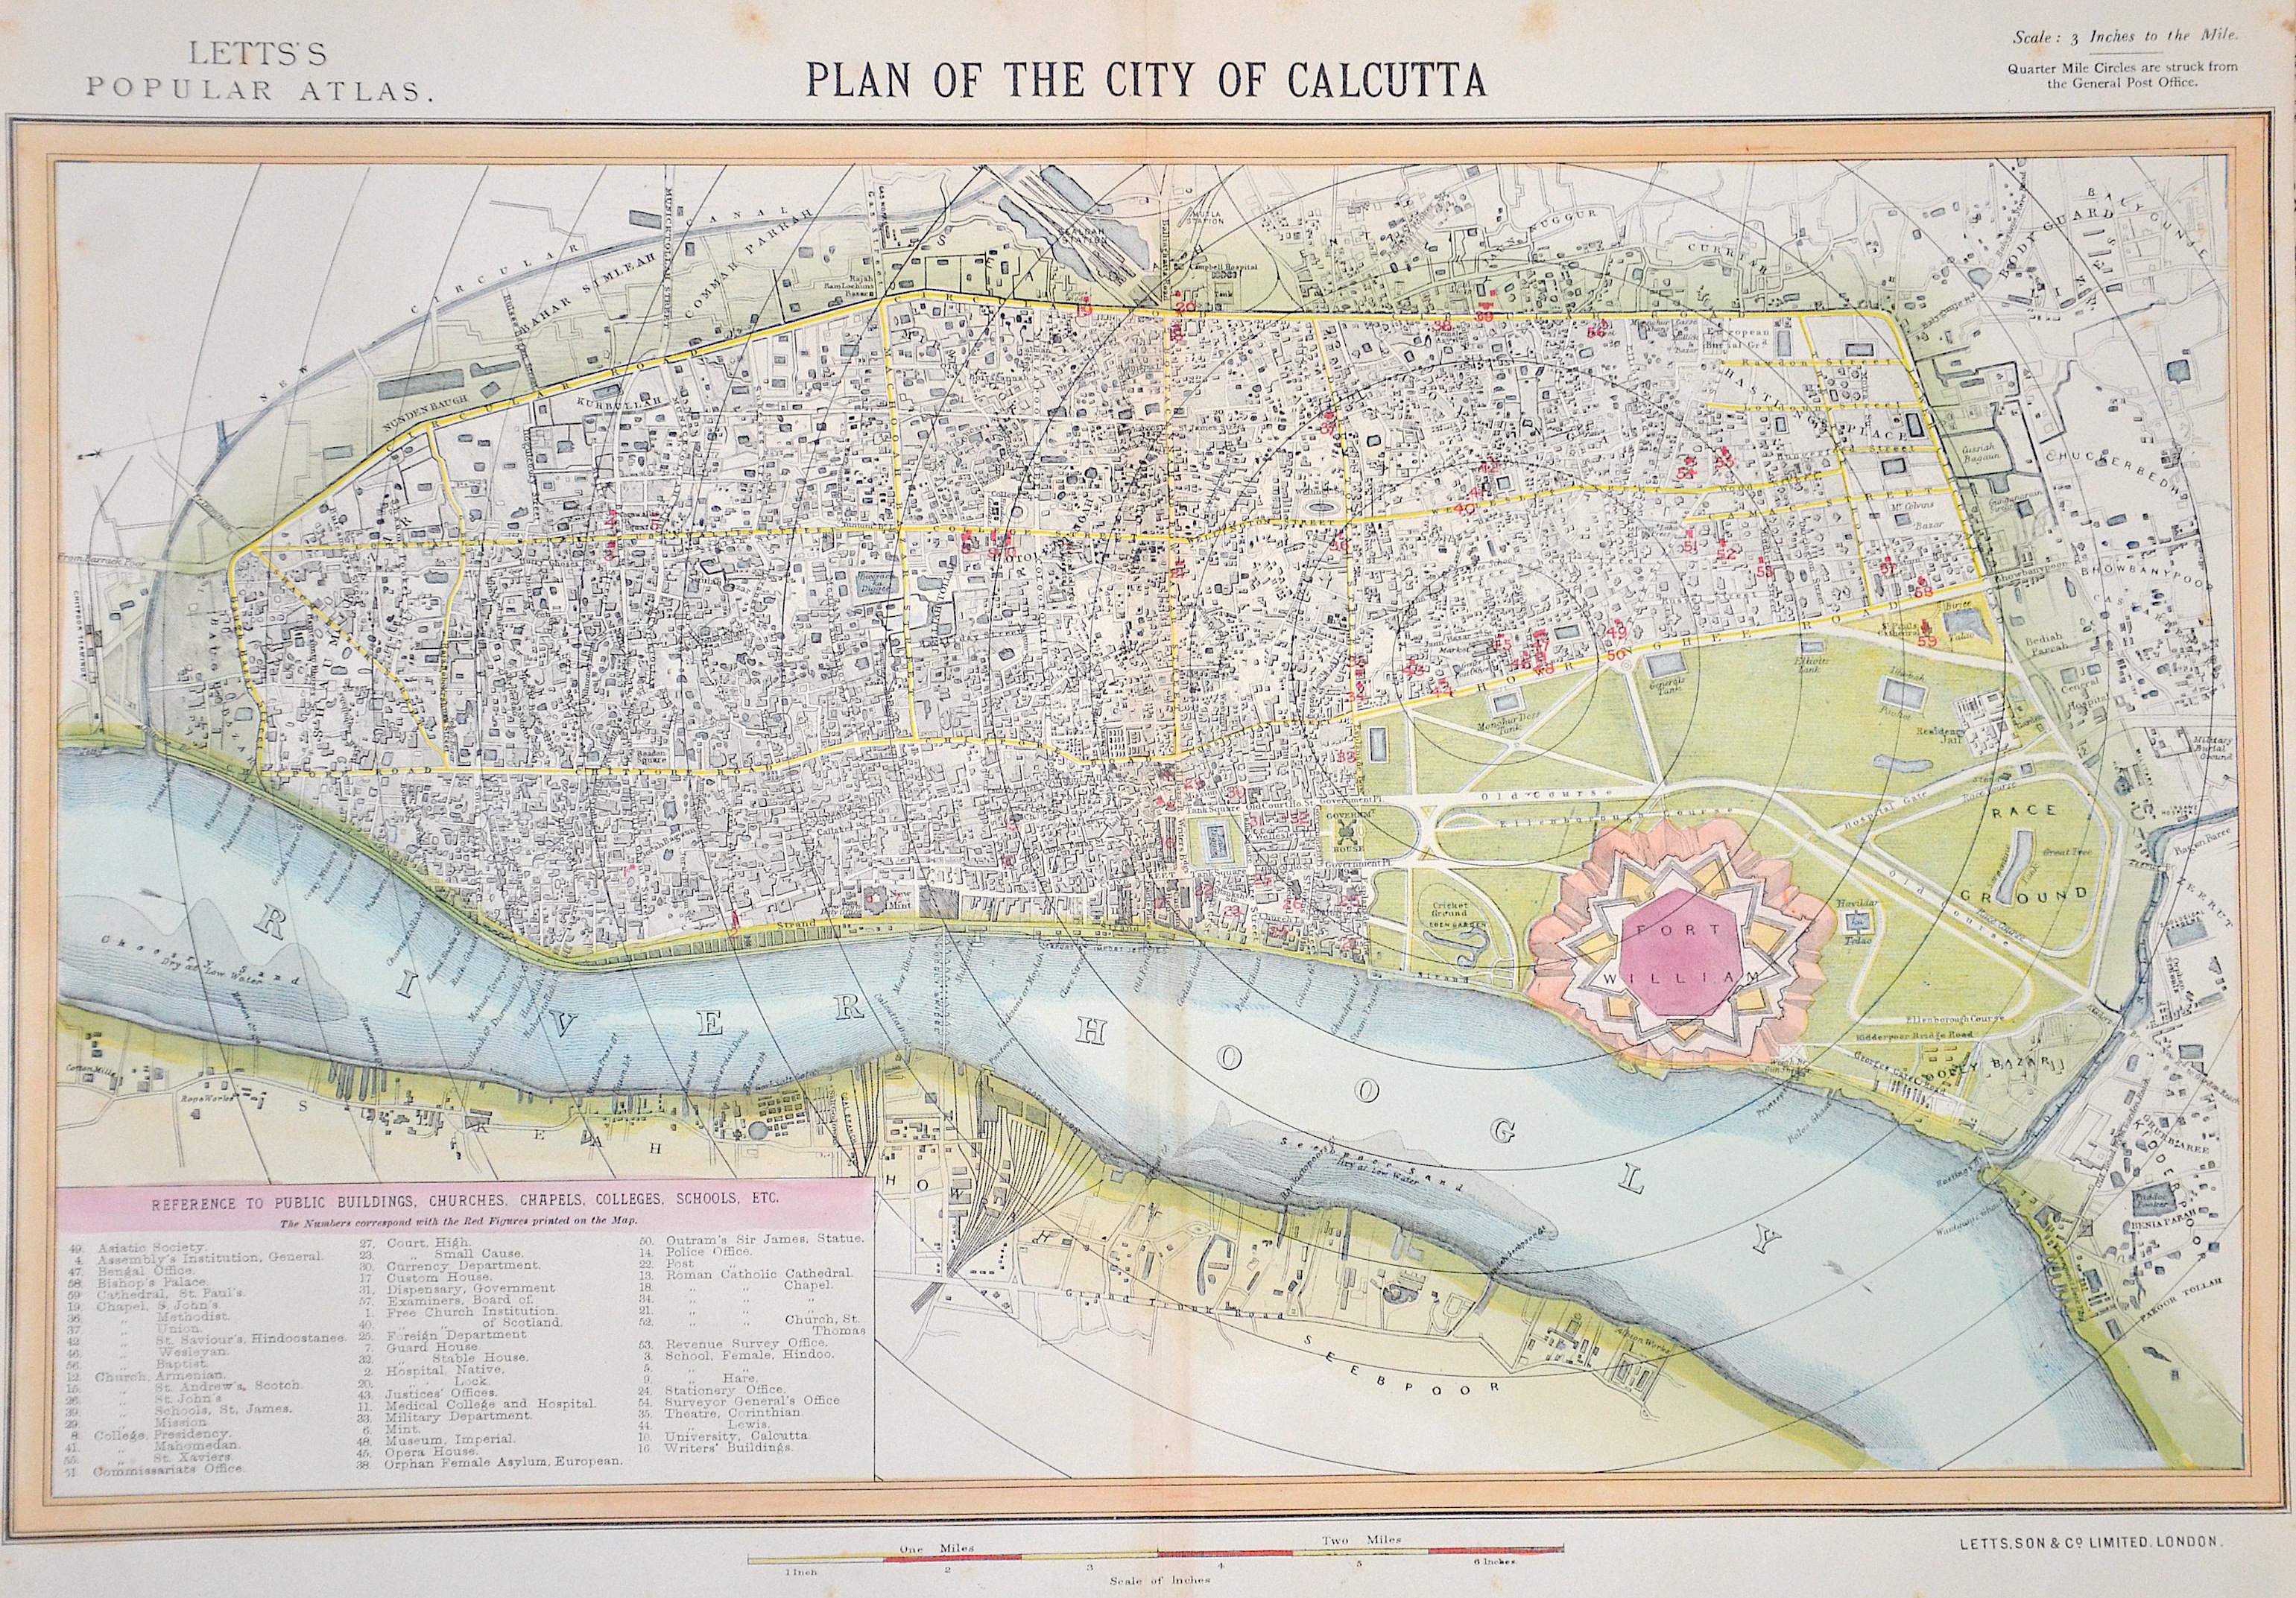 Letts Son & Co  Plan of the City of Calcutta / Letts’s Popular Atlas.